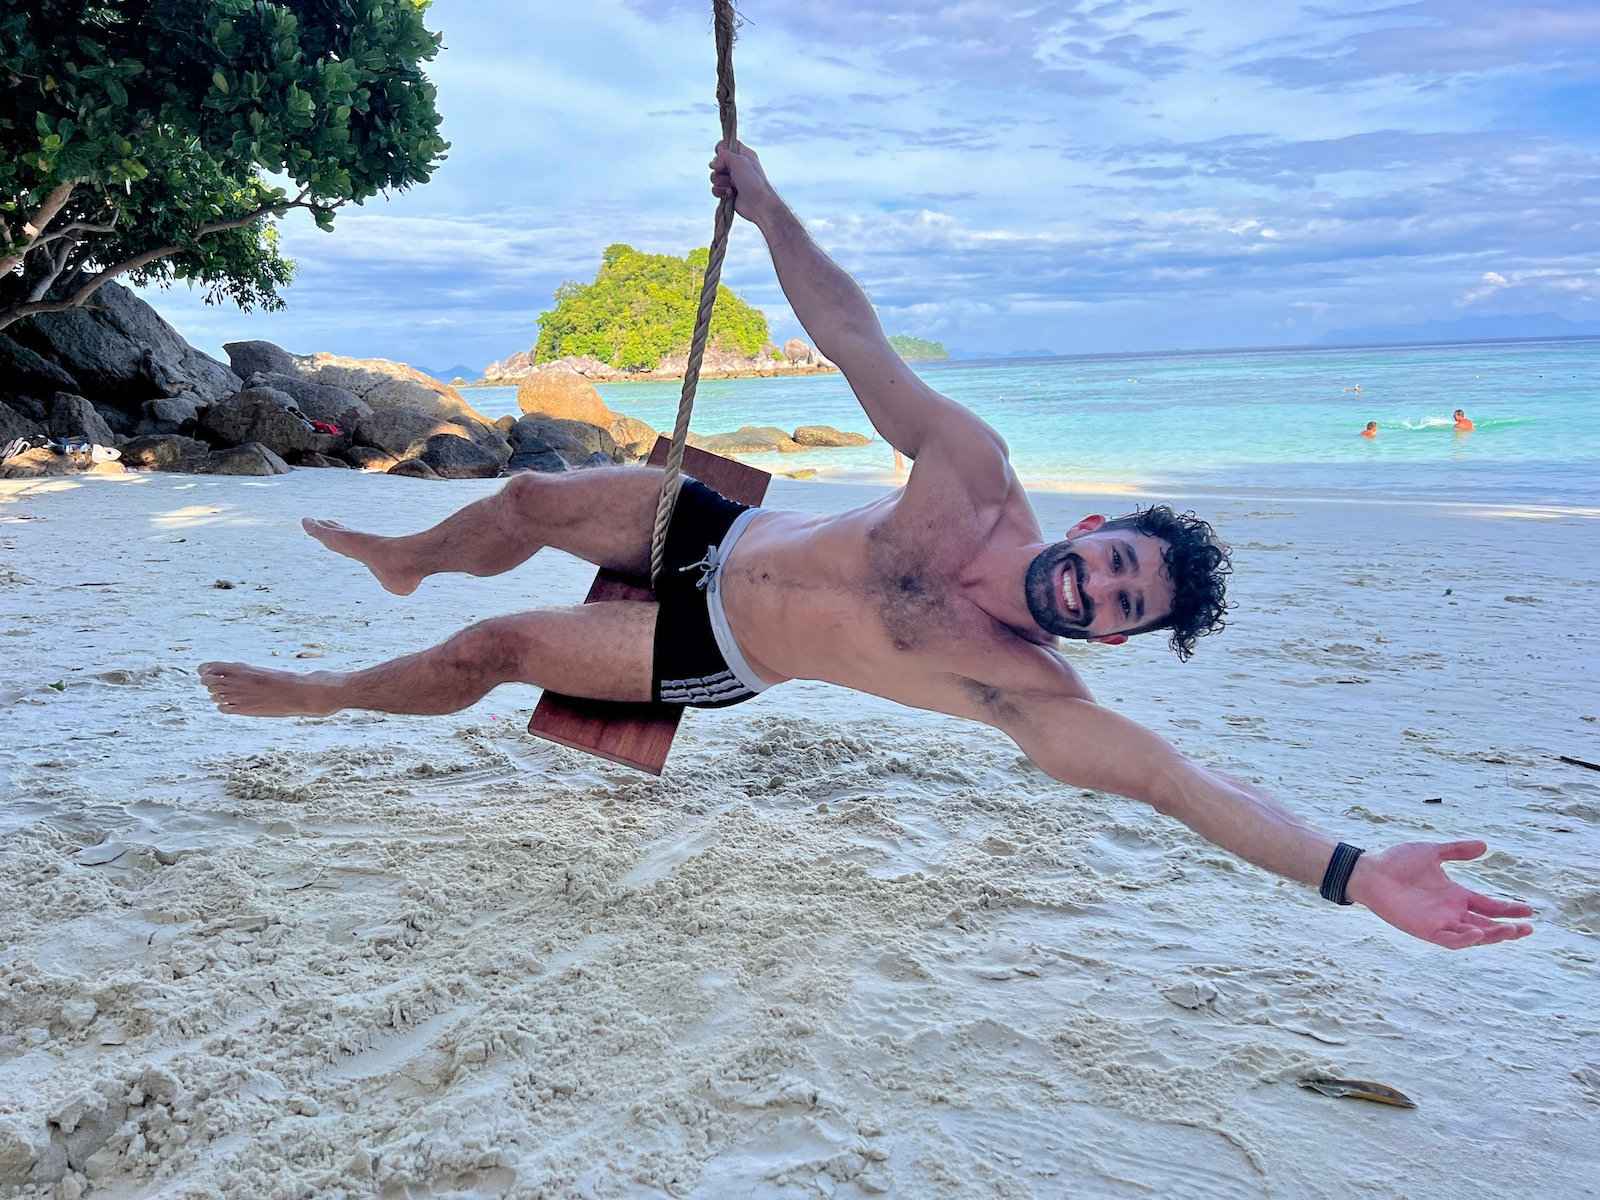 A man in tiny shorts smiling and swinging on a simple beach swing.